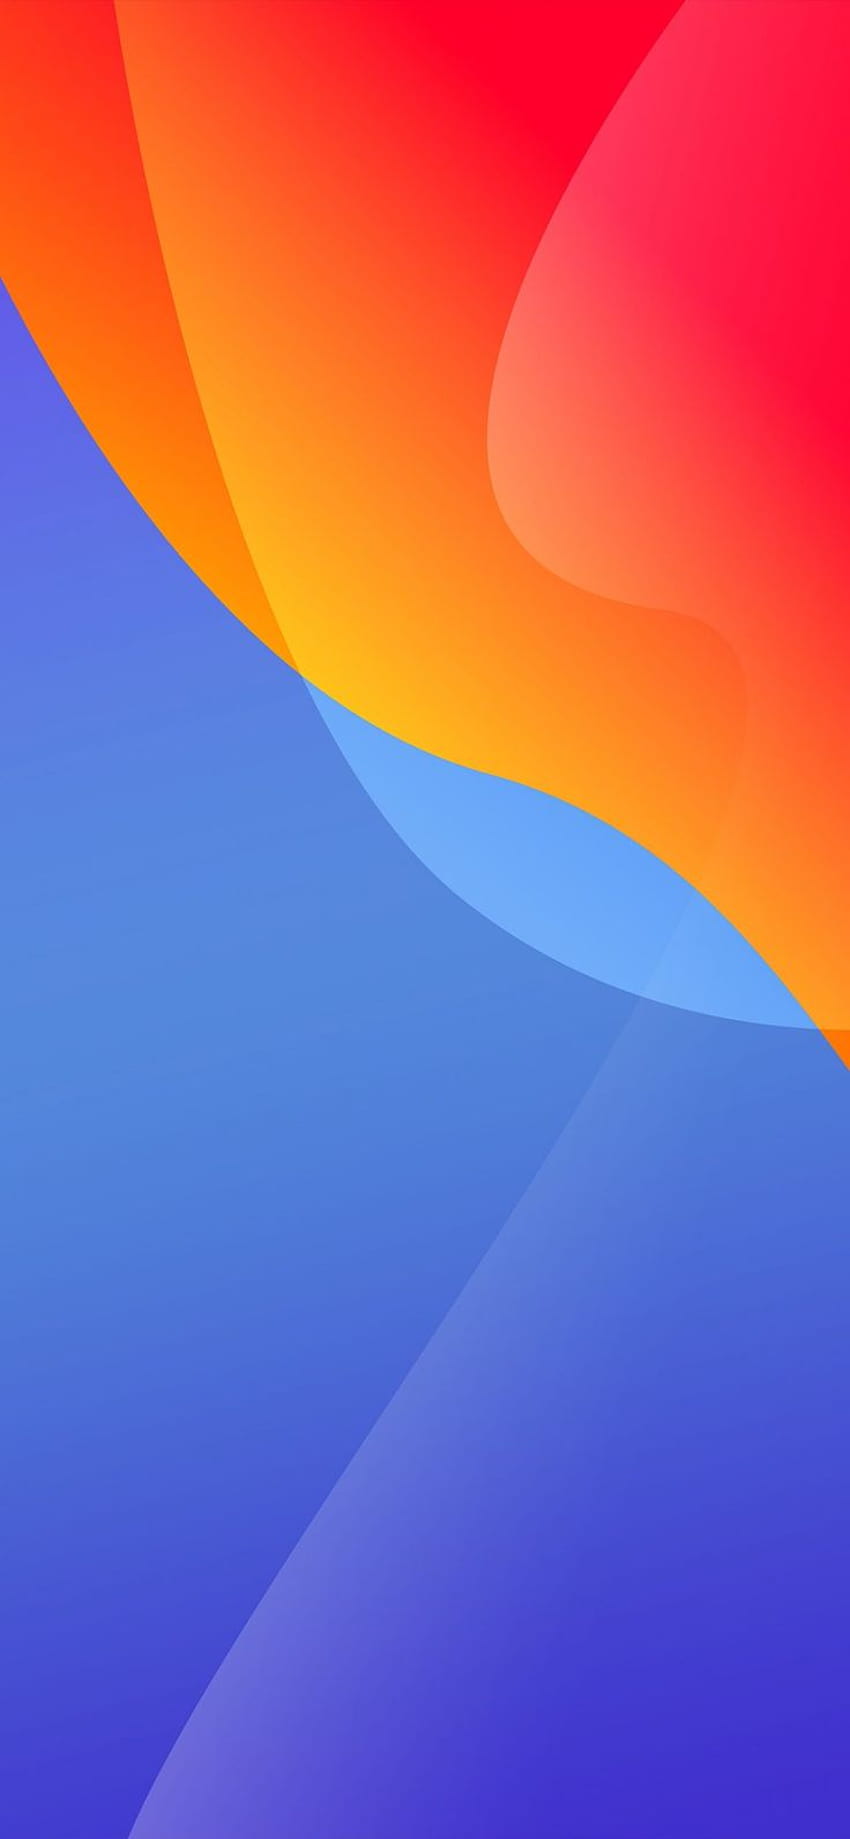 Blue to orange new gradient on Twitter. Color iphone, iPhone homescreen ...